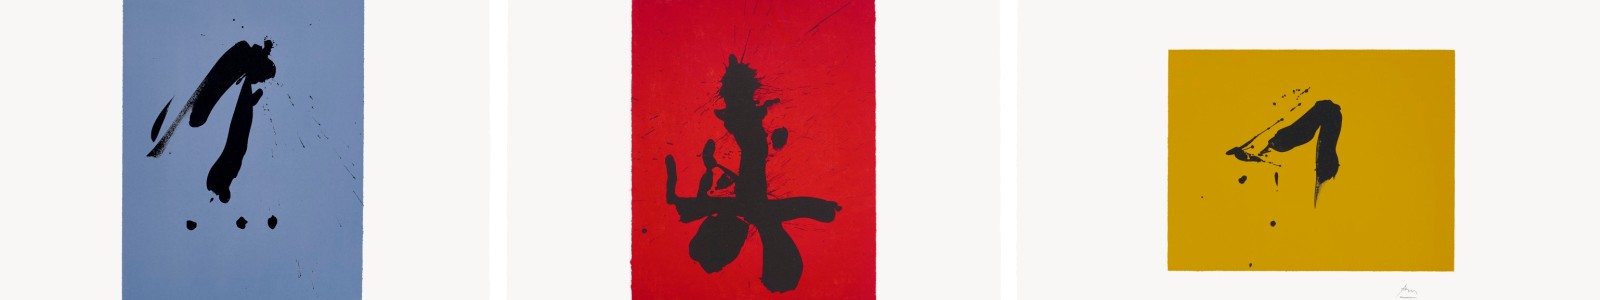 Robert Motherwell Prints from the Dedalus Foundation